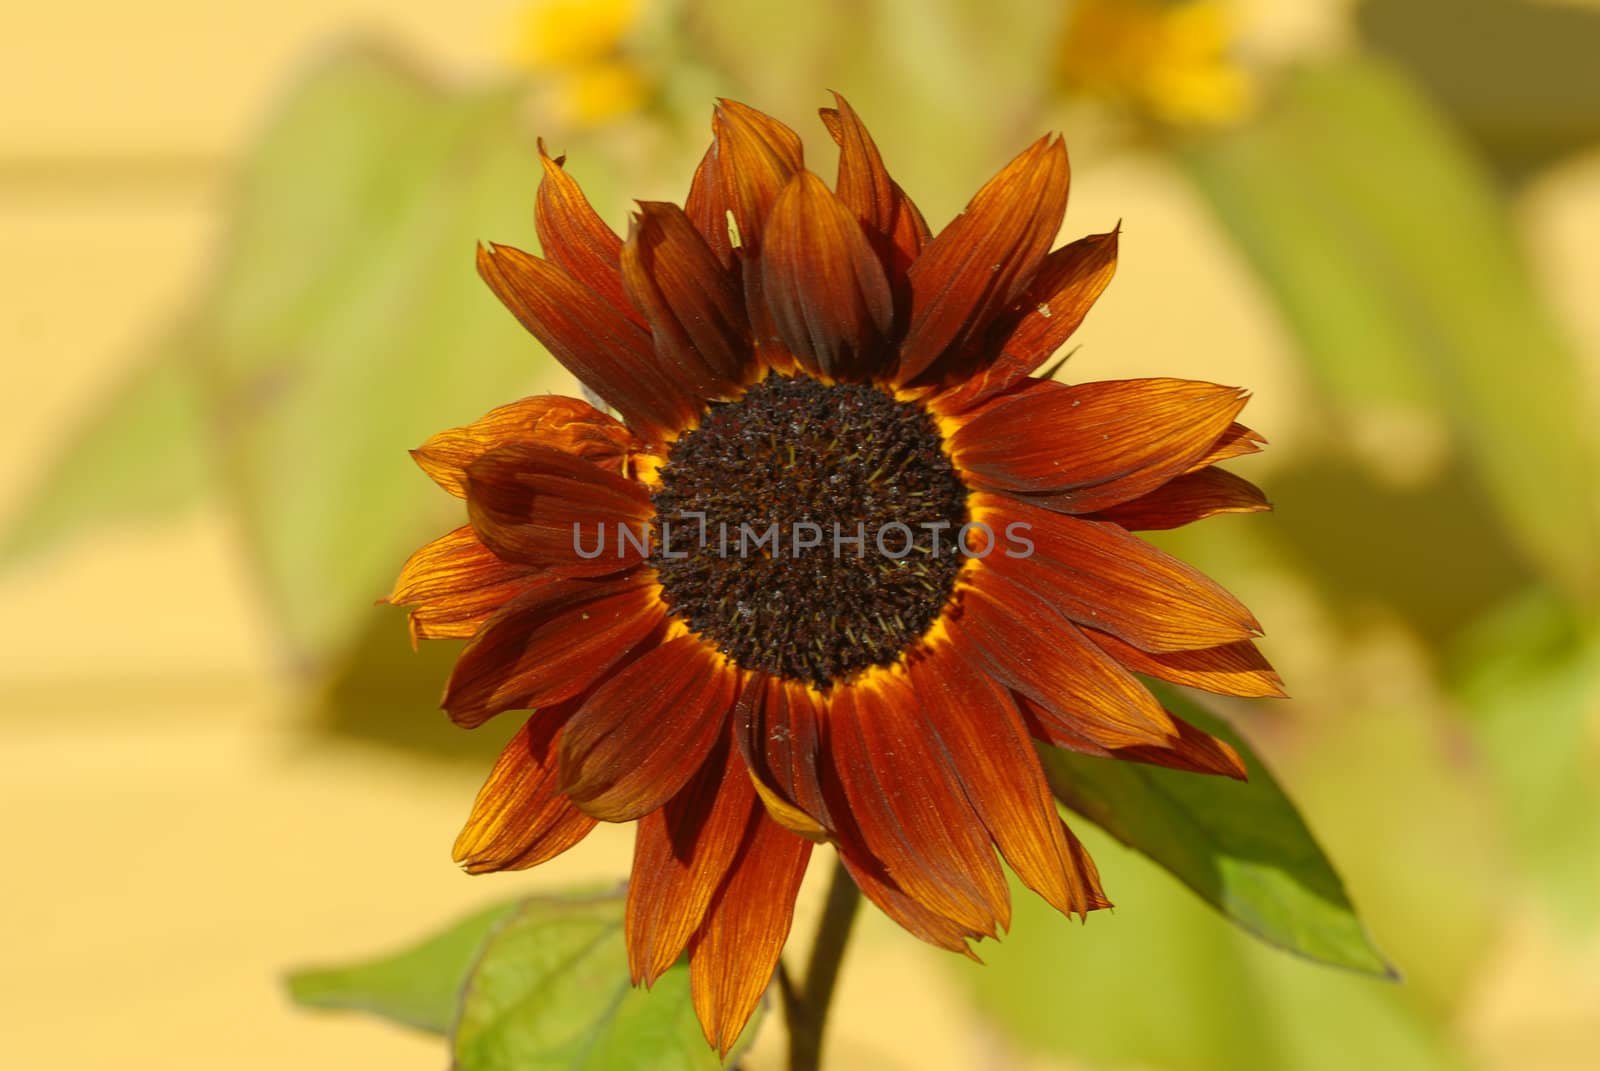 The red sunflower by roooos